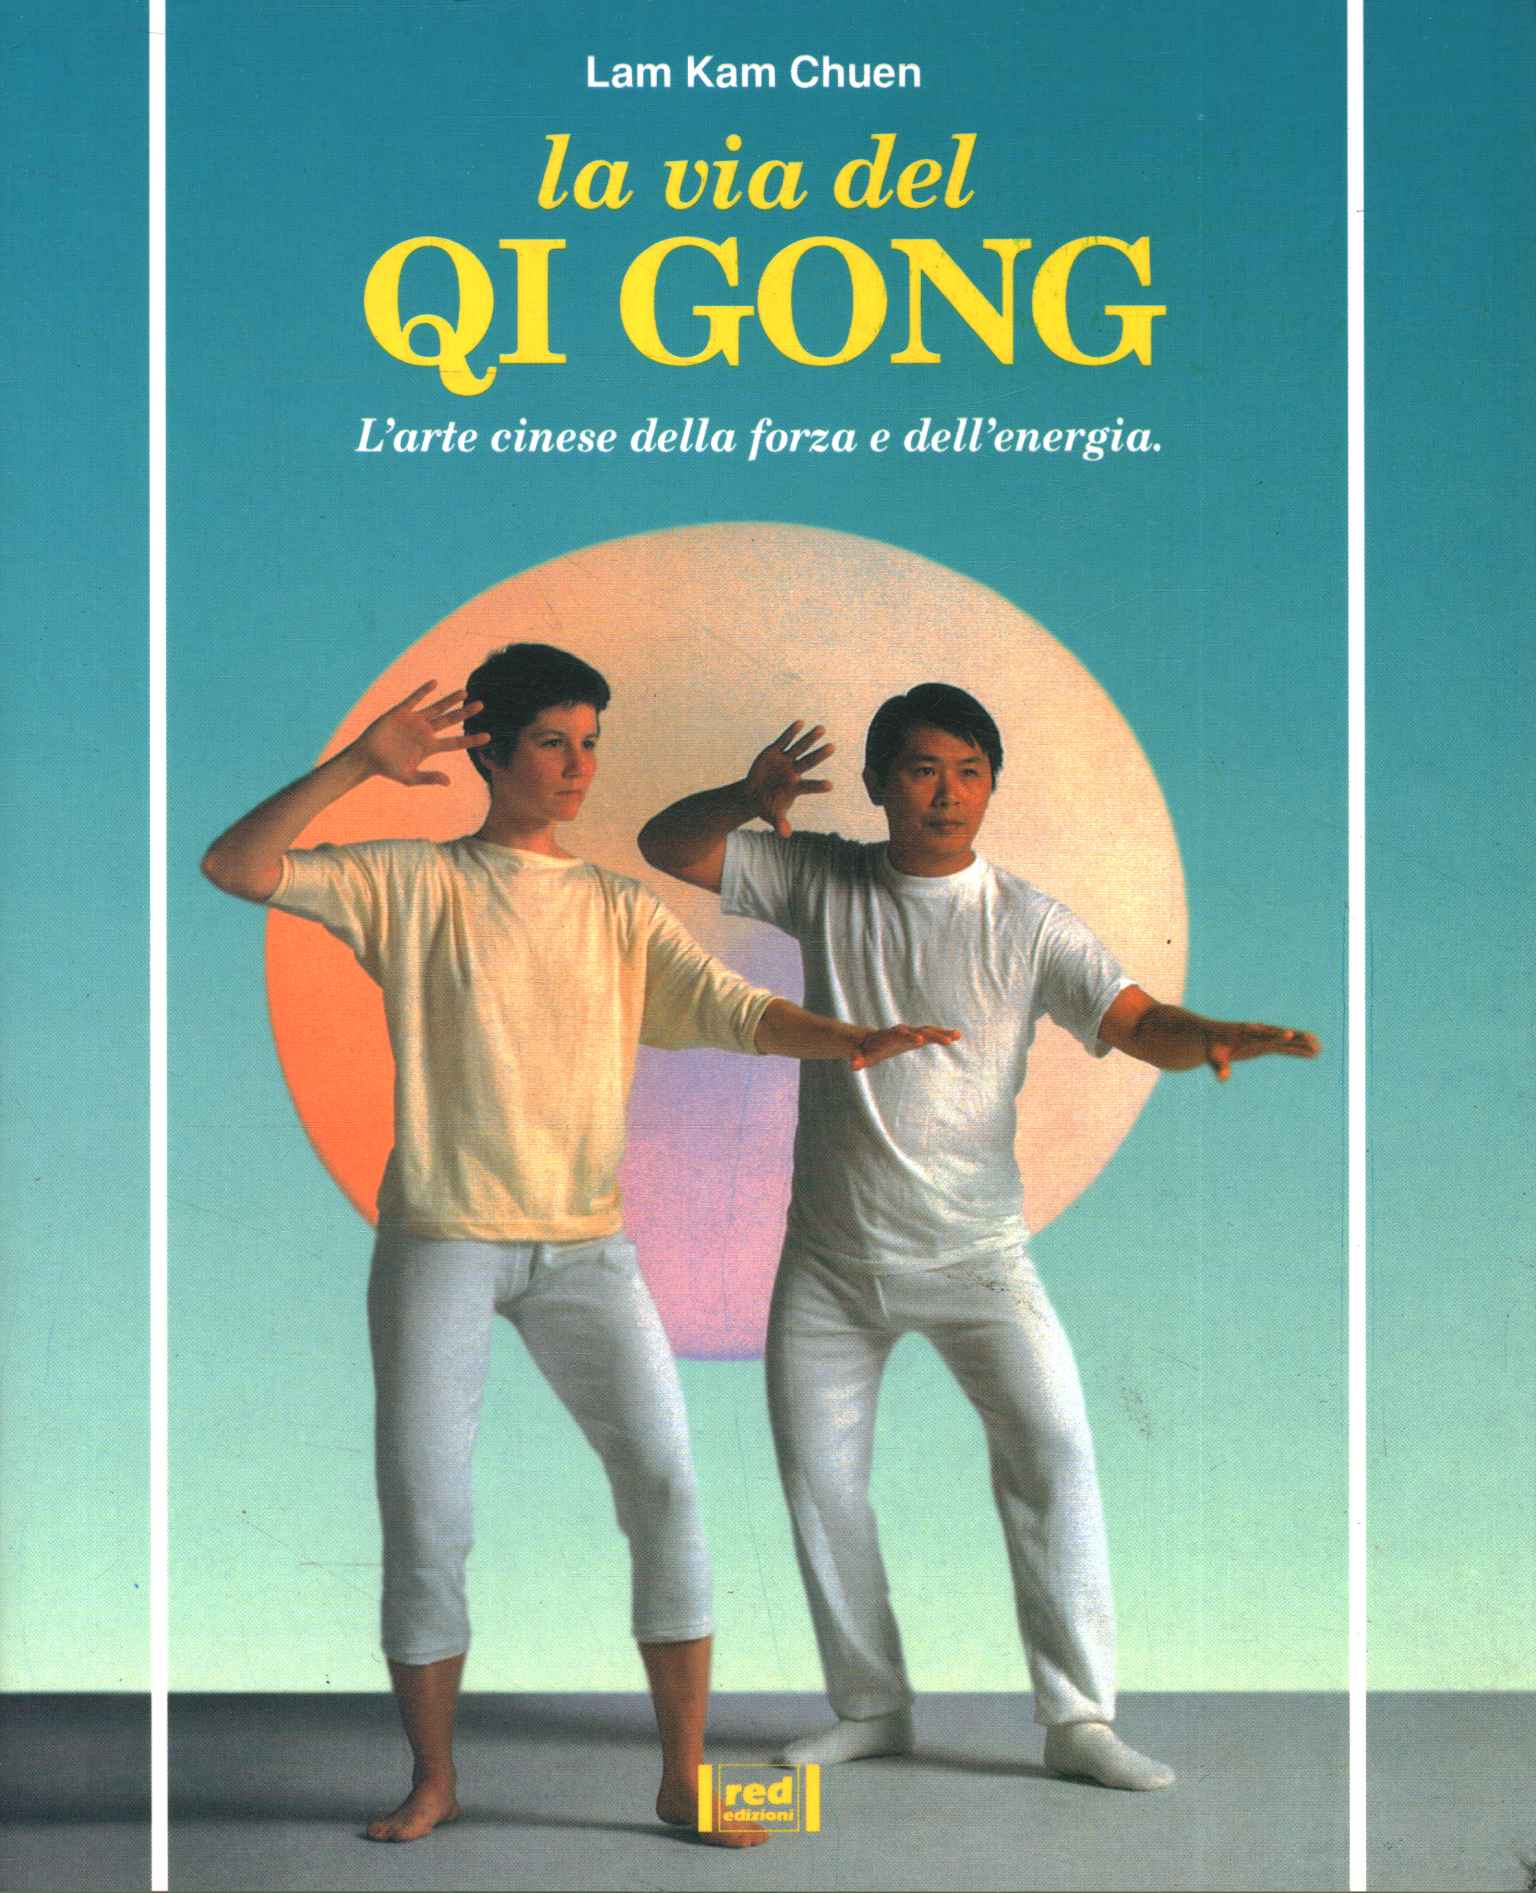 The way of Qi Gong